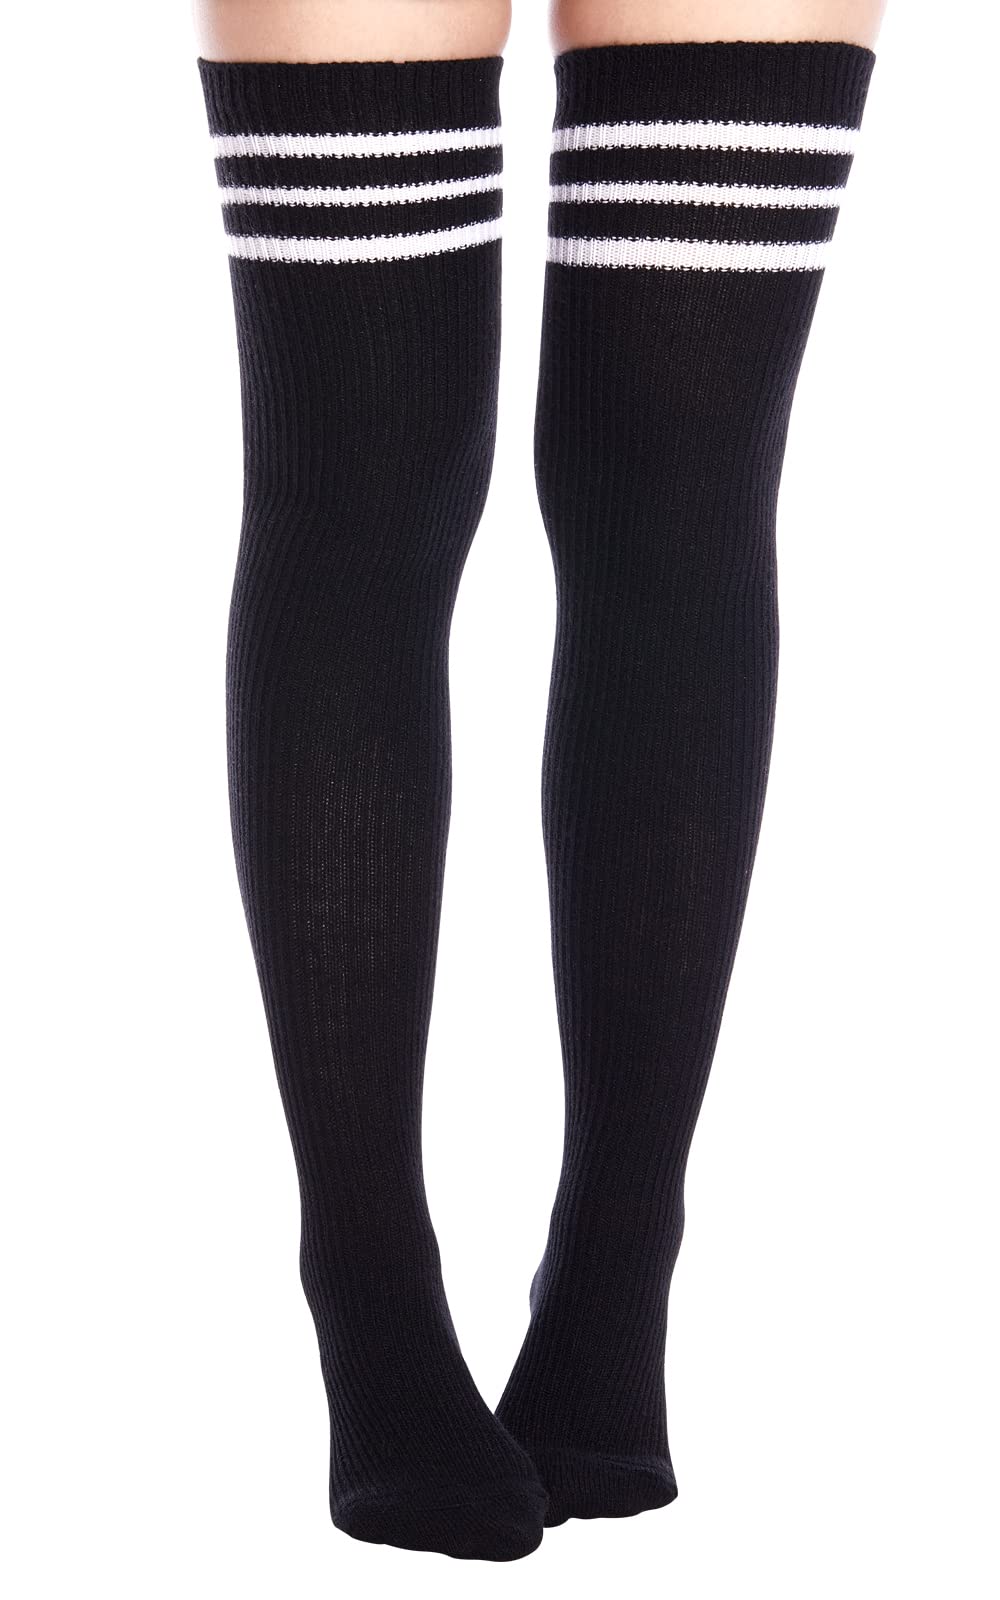 Extra Long Warm Knit Striped Thigh Highs Leg Warmers-Black & White Striped - Moon Wood